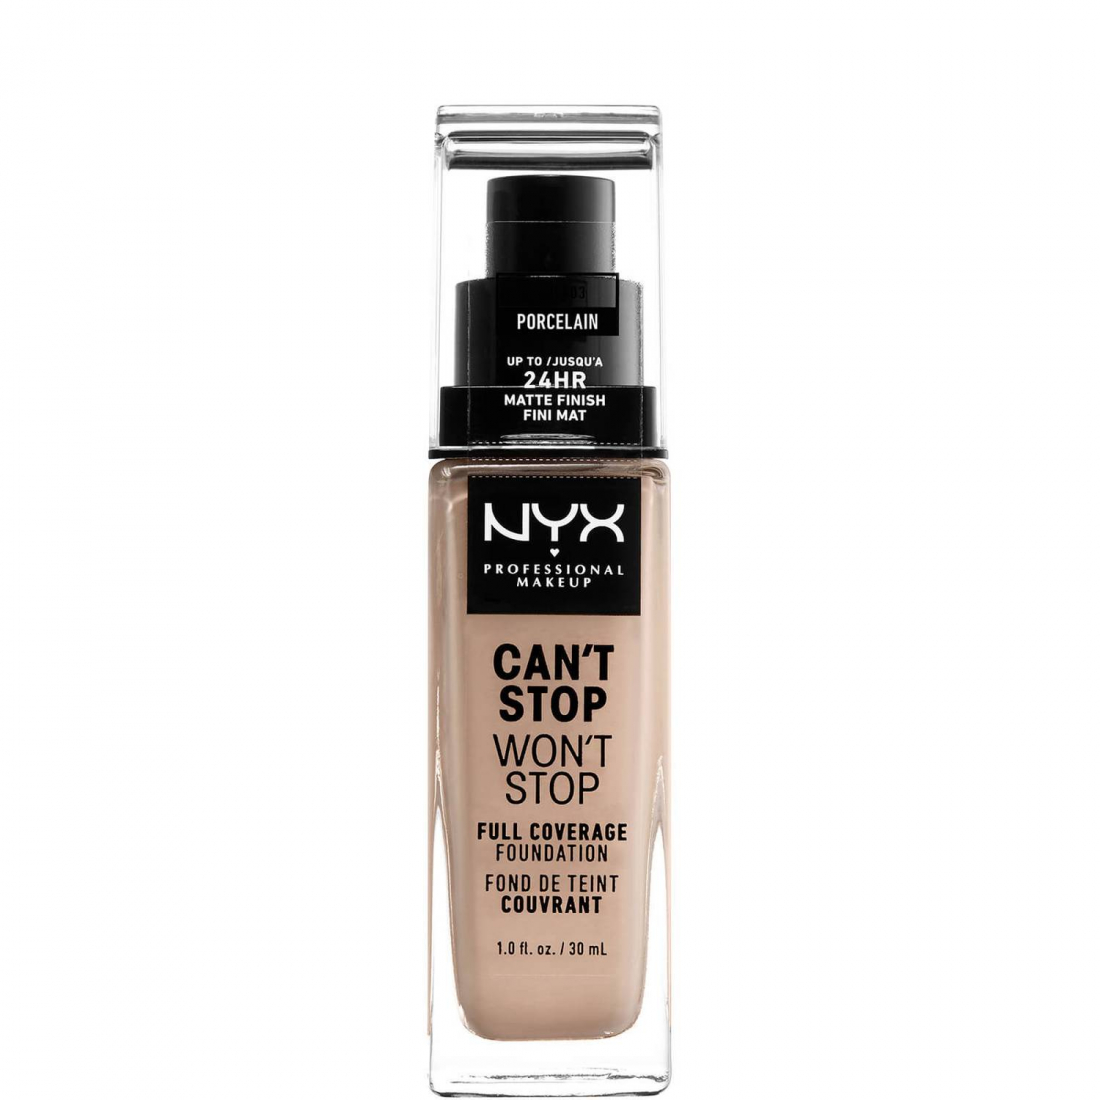 'Can't Stop Won't Stop Full Coverage' Foundation - Porcelain 30 ml